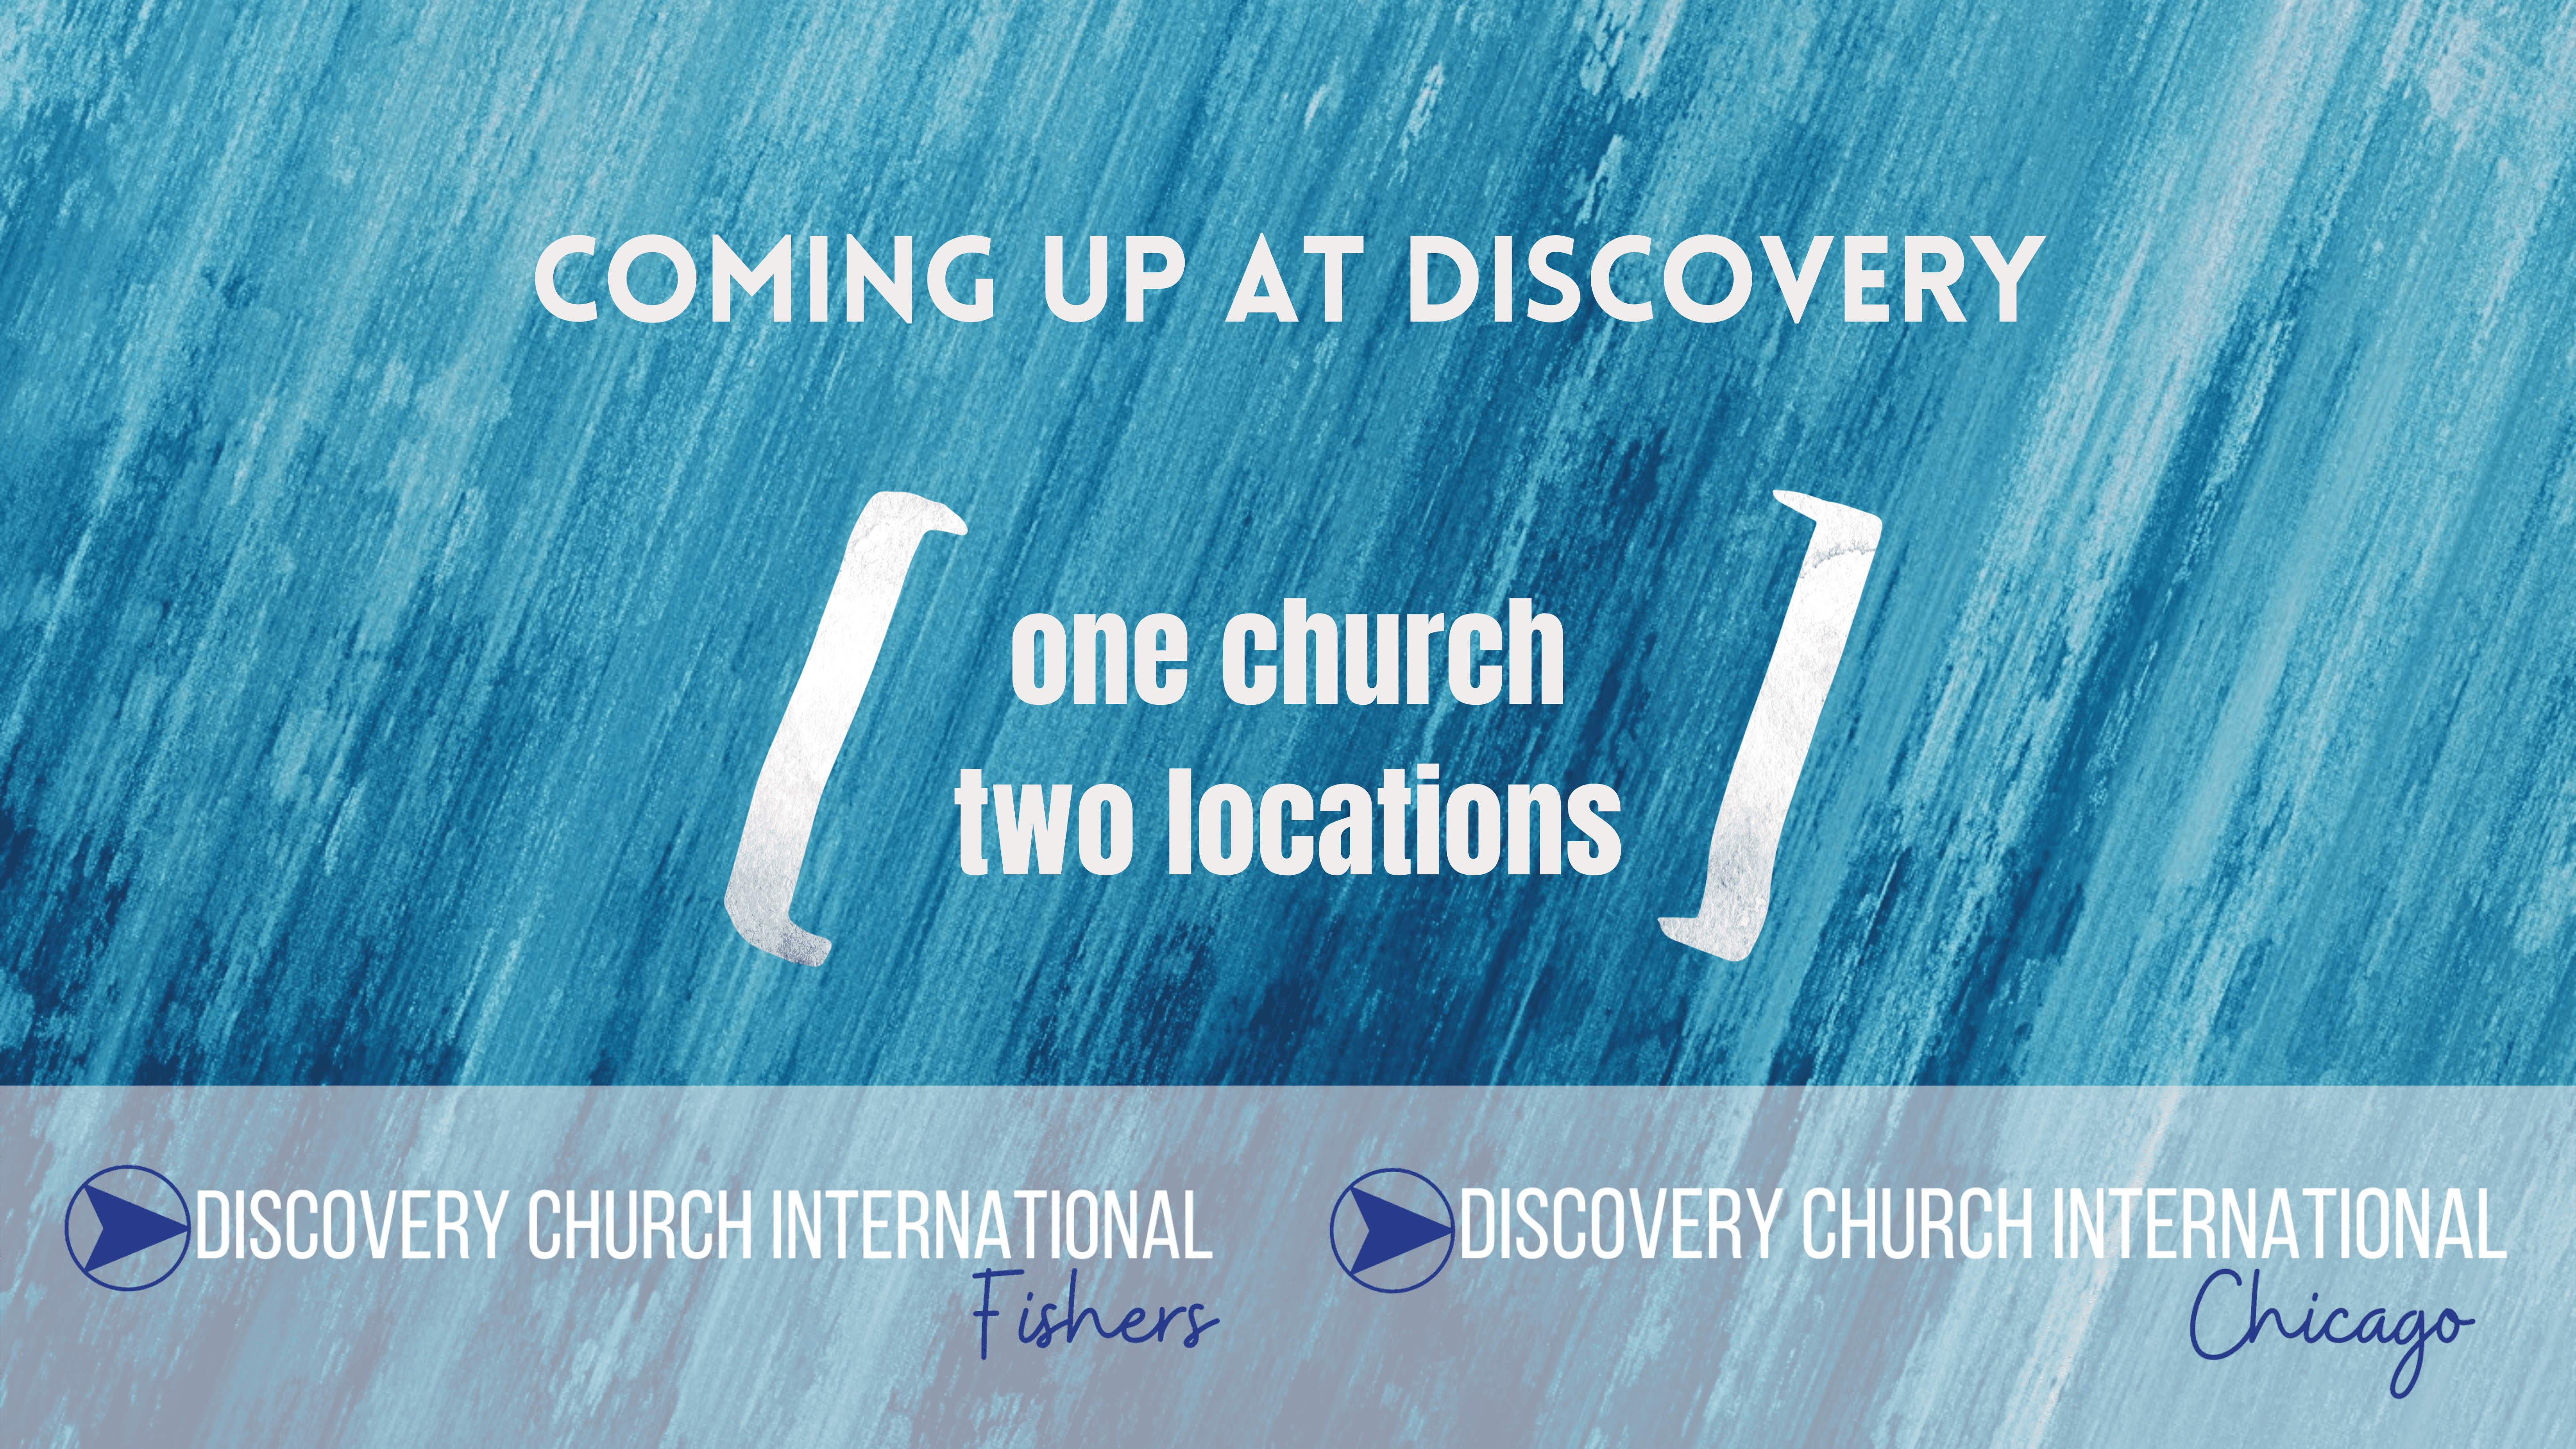 Discovery Church International - One church - two locations